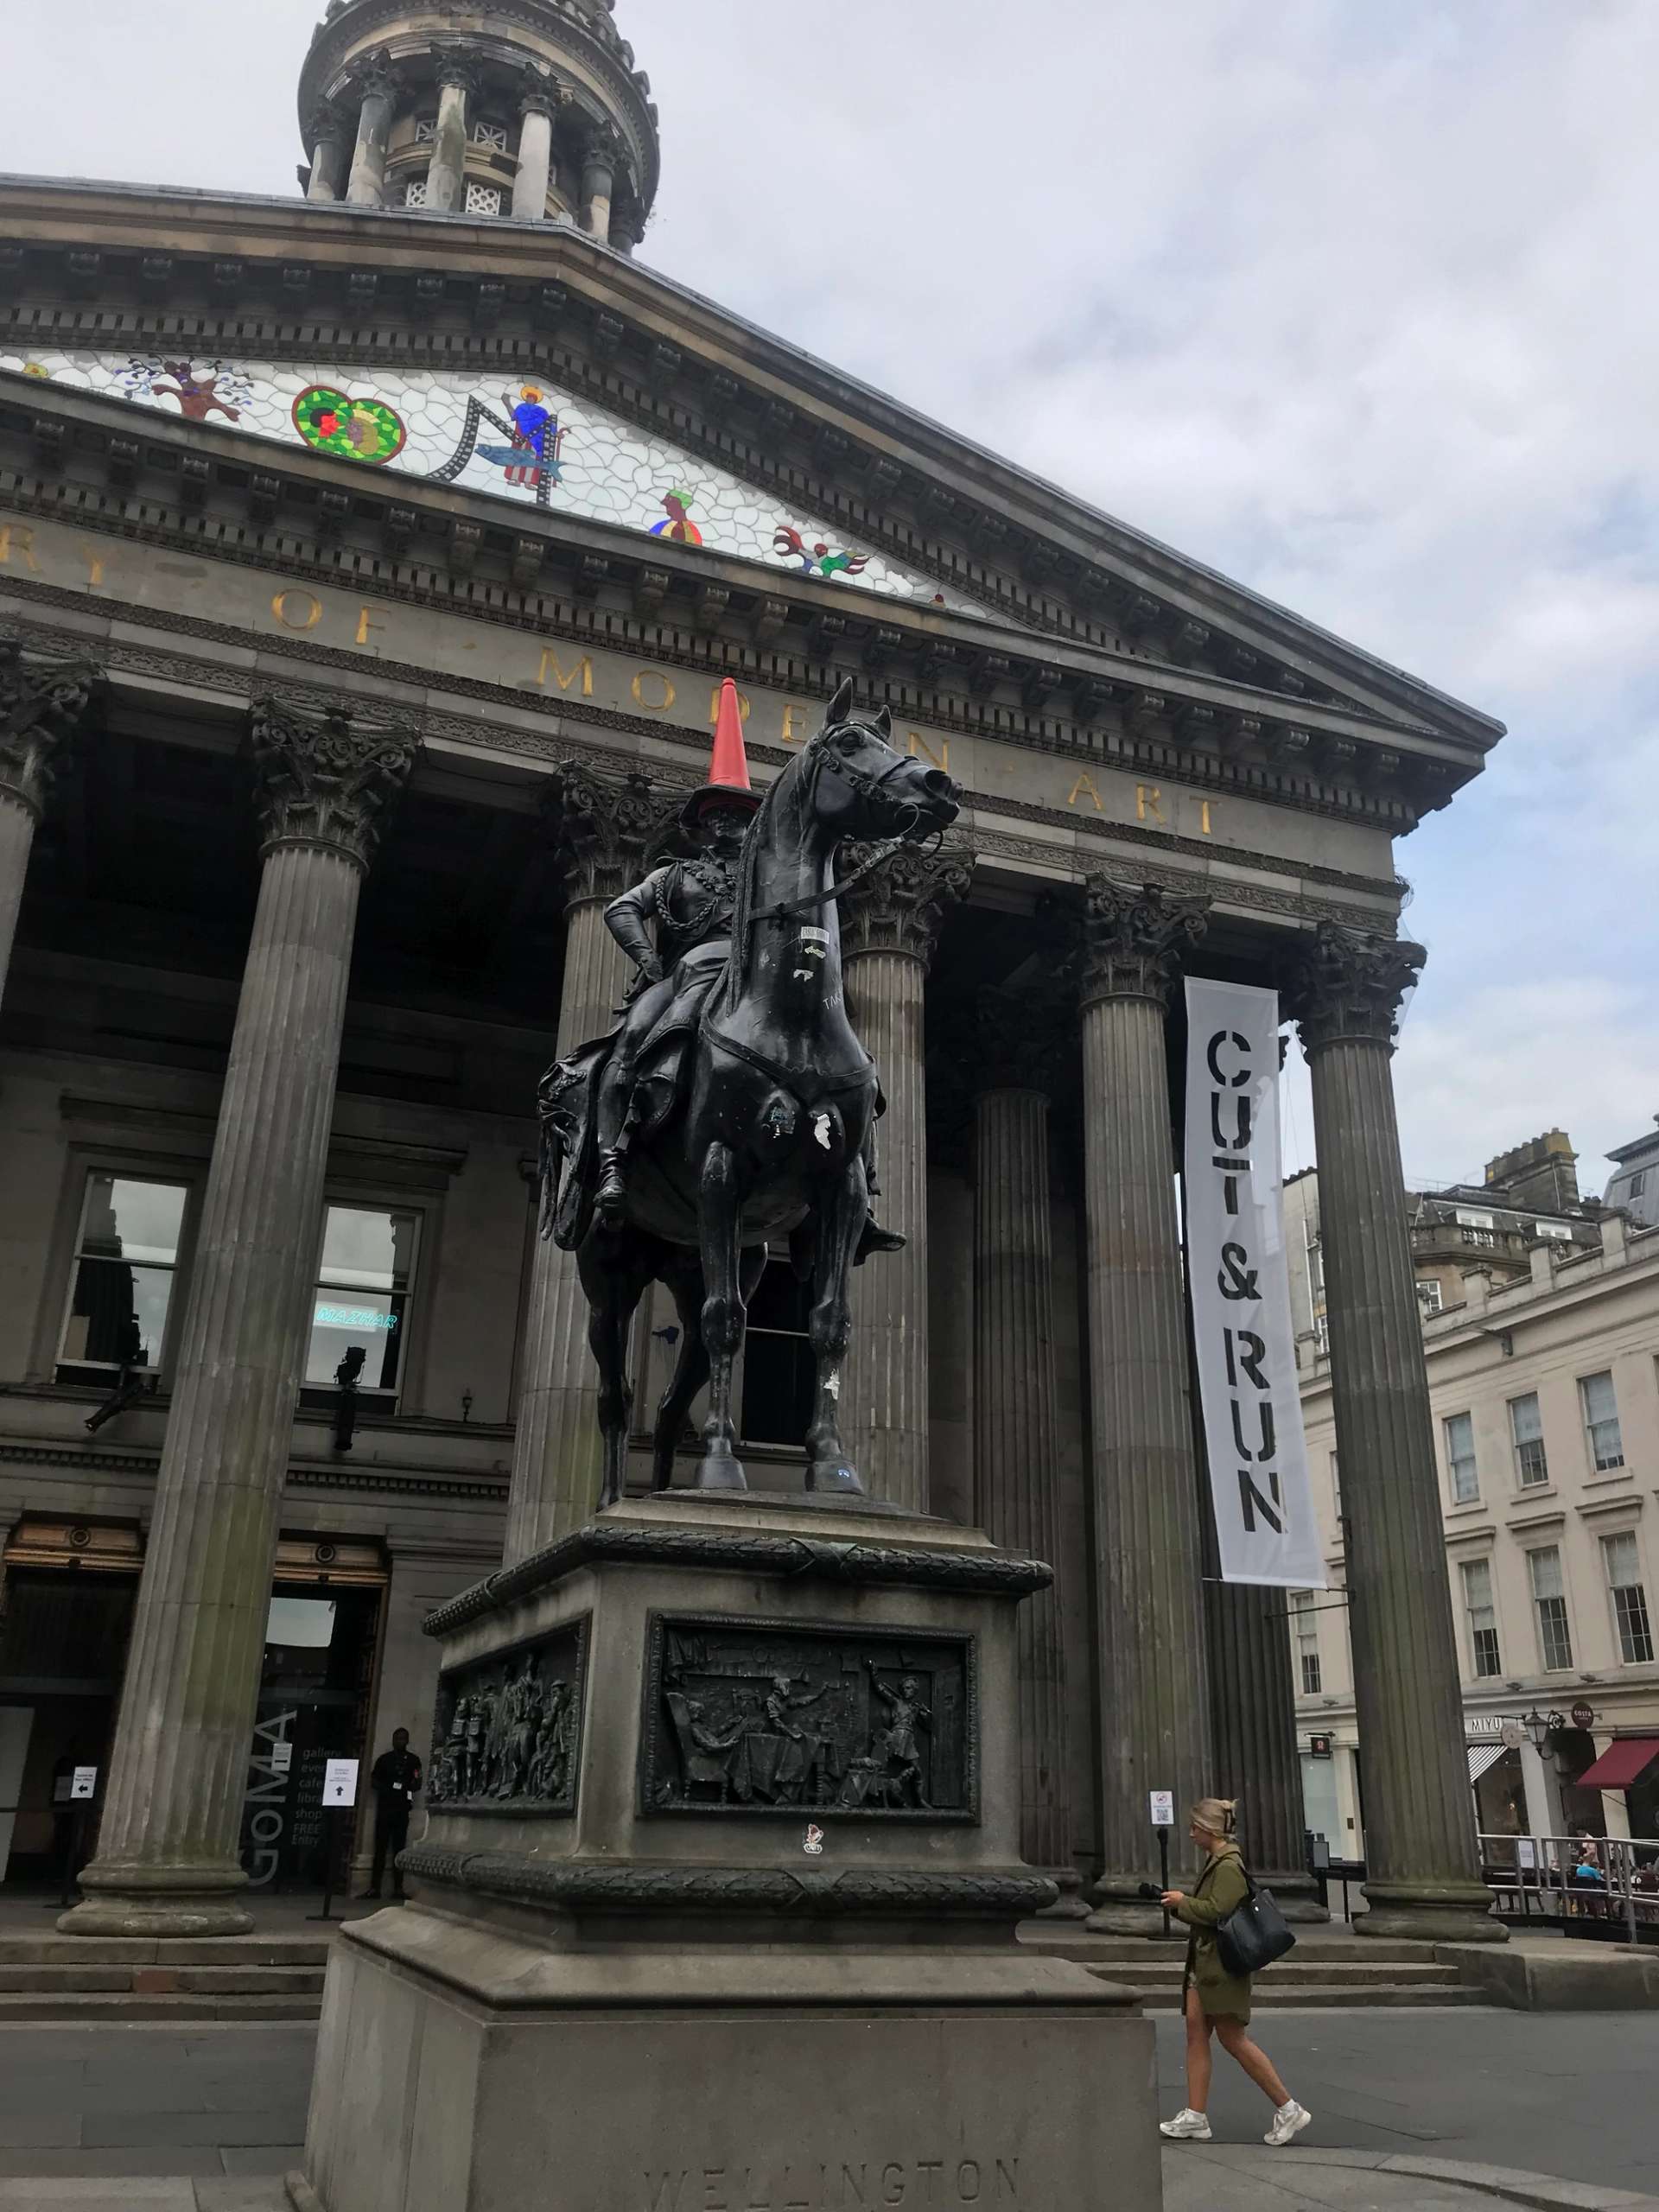 A photograph of the notorious Duke of Wellington statue outside of the GoMA, which has been vandalised with a traffic cone for decades.